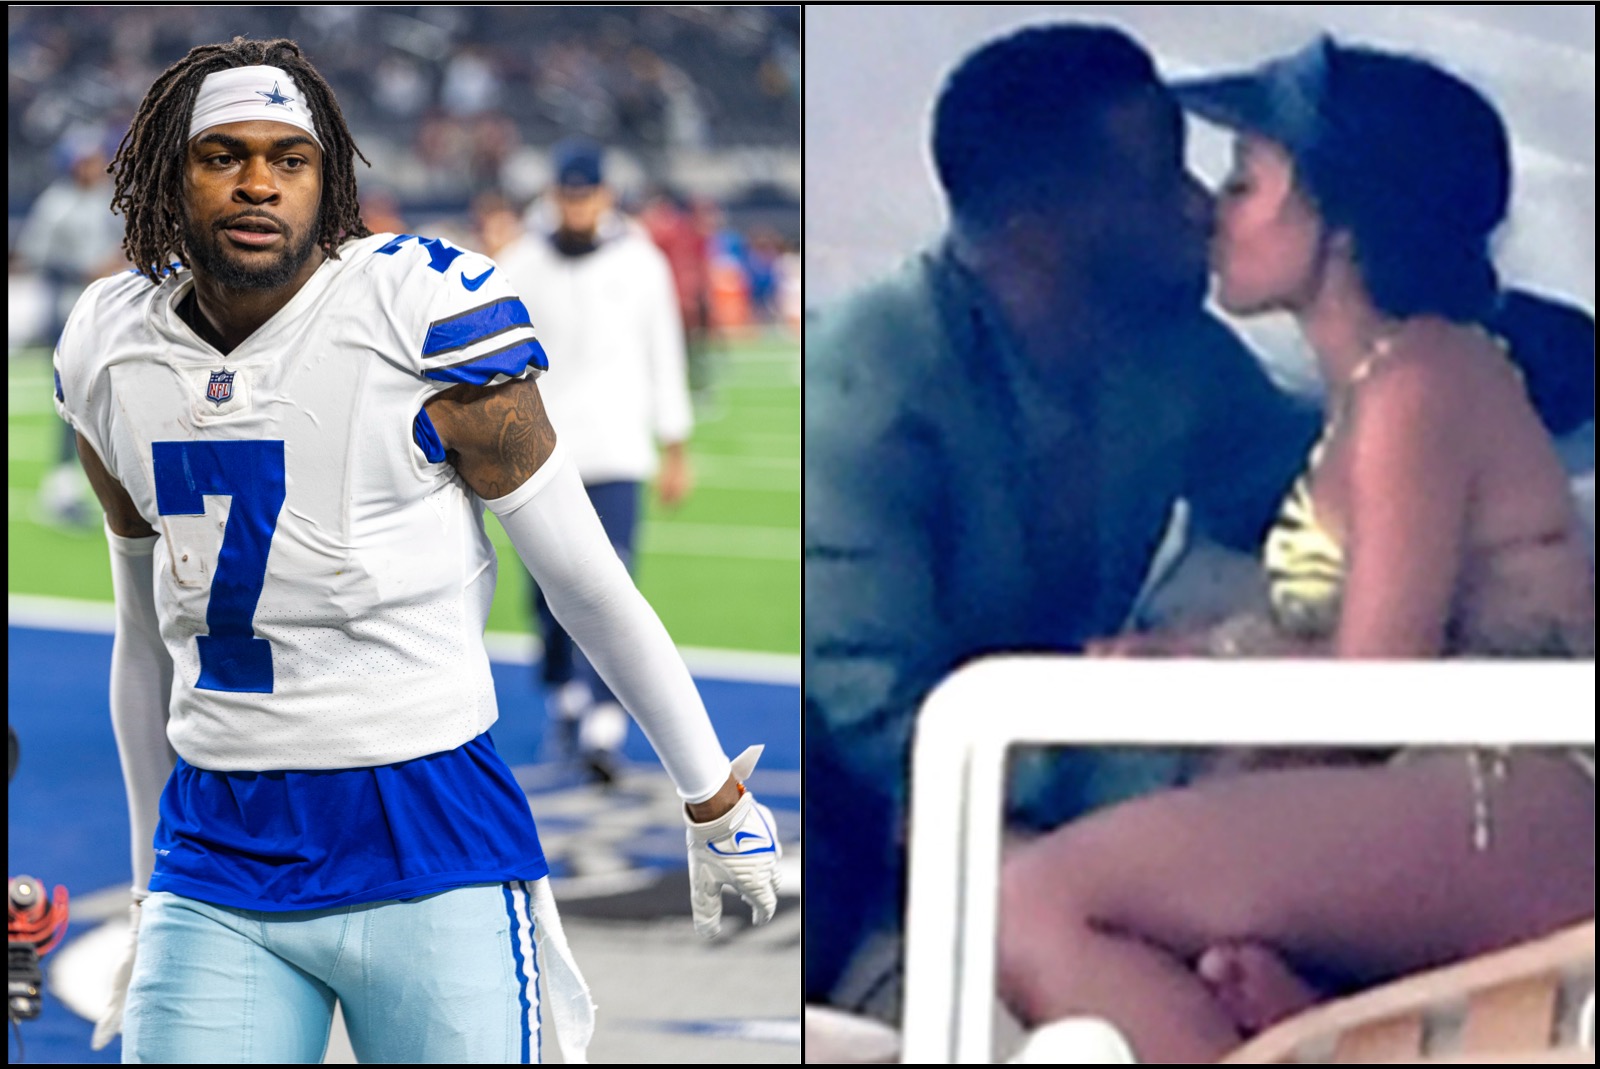 Joie Chavis is reportedly pregnant with Trevon Diggs' child